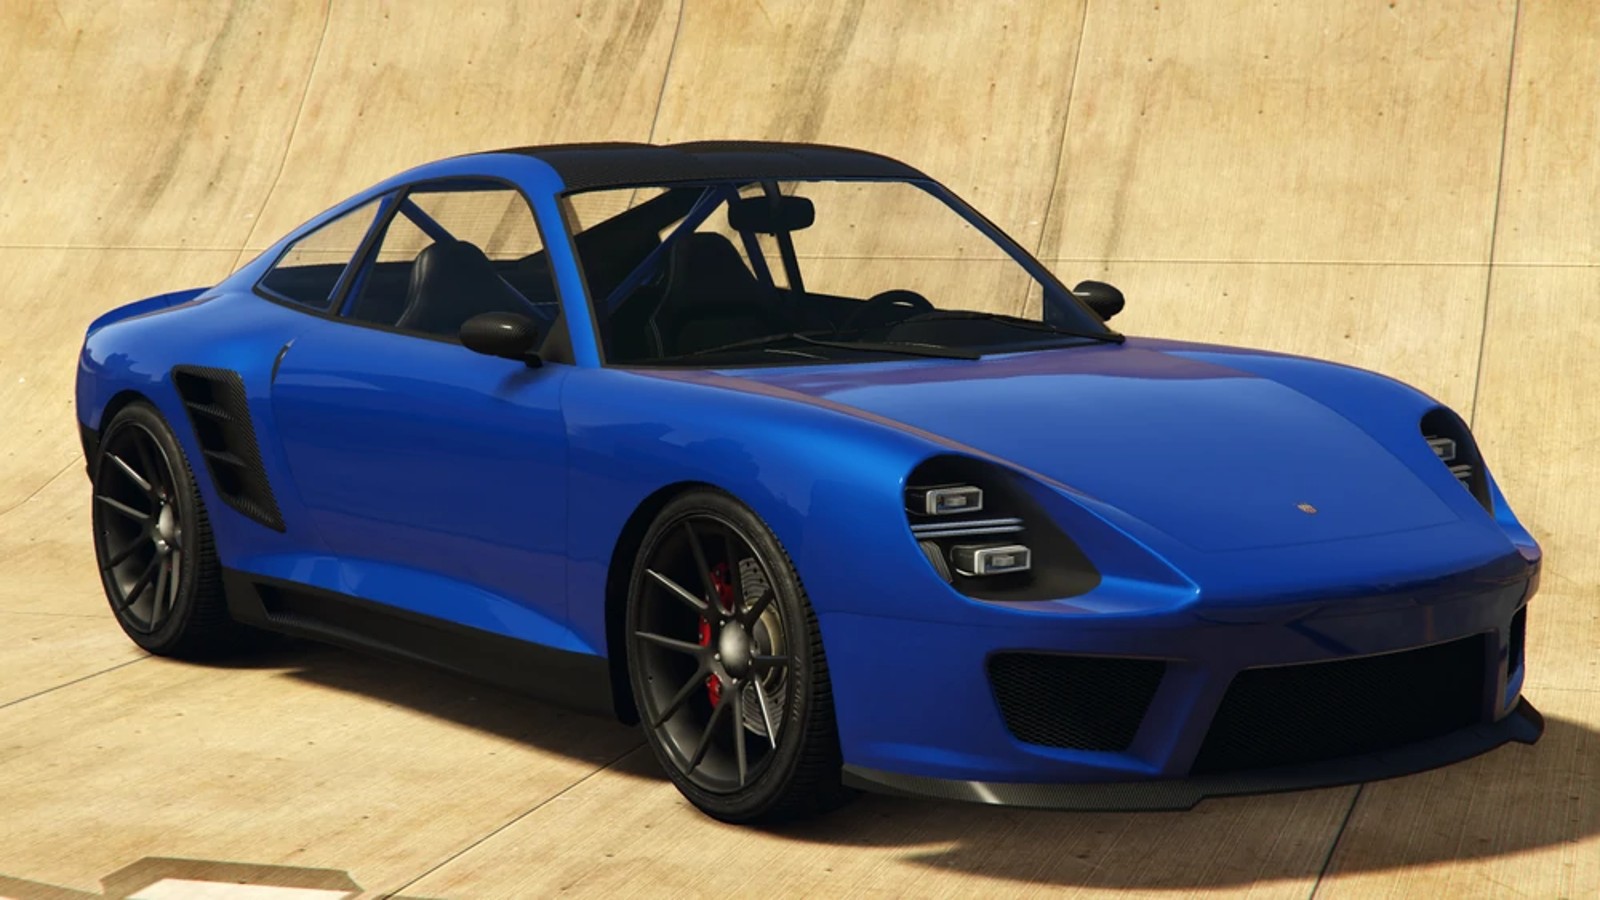 GTA Online weekly Podium Vehicle for November 3: How to beat the Lucky Wheel every time